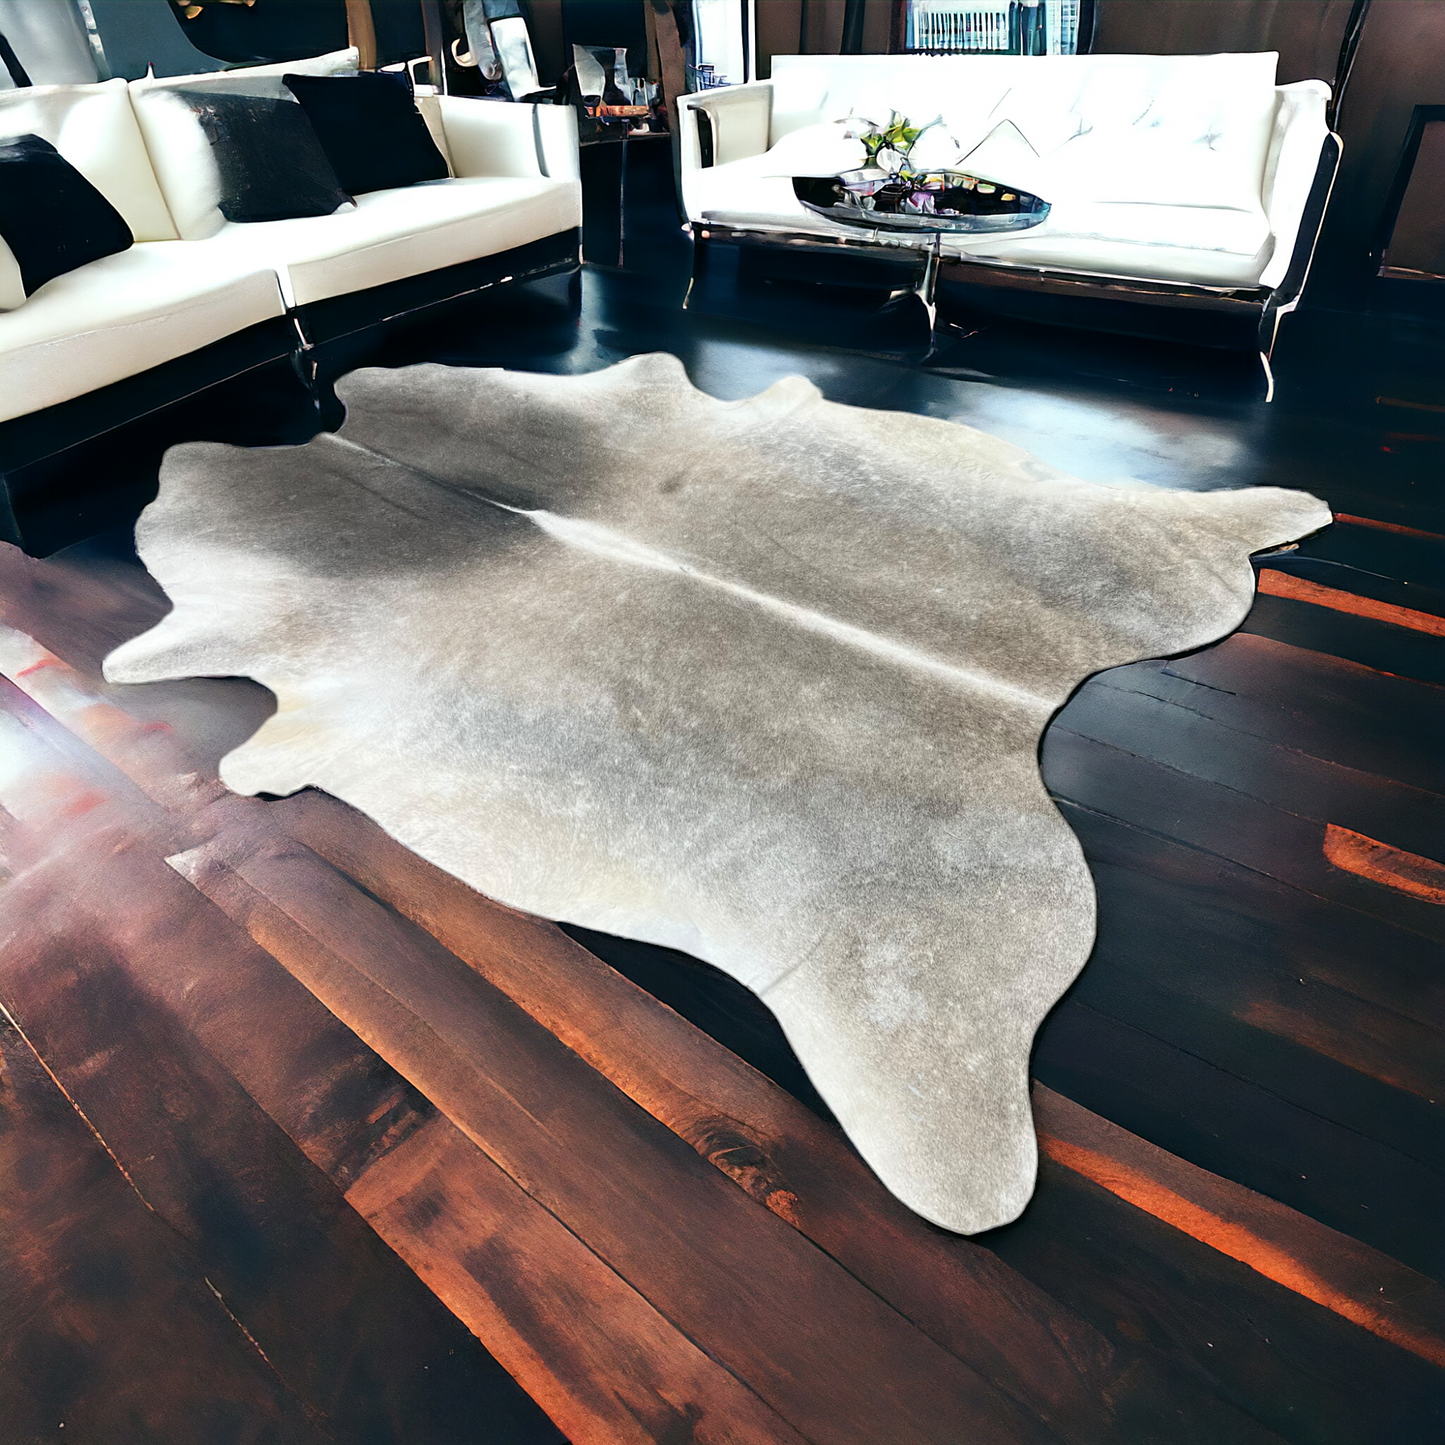 Plush XL gray tan Cowhide Rug - Sophisticated Natural Accent for High-End Interior Design